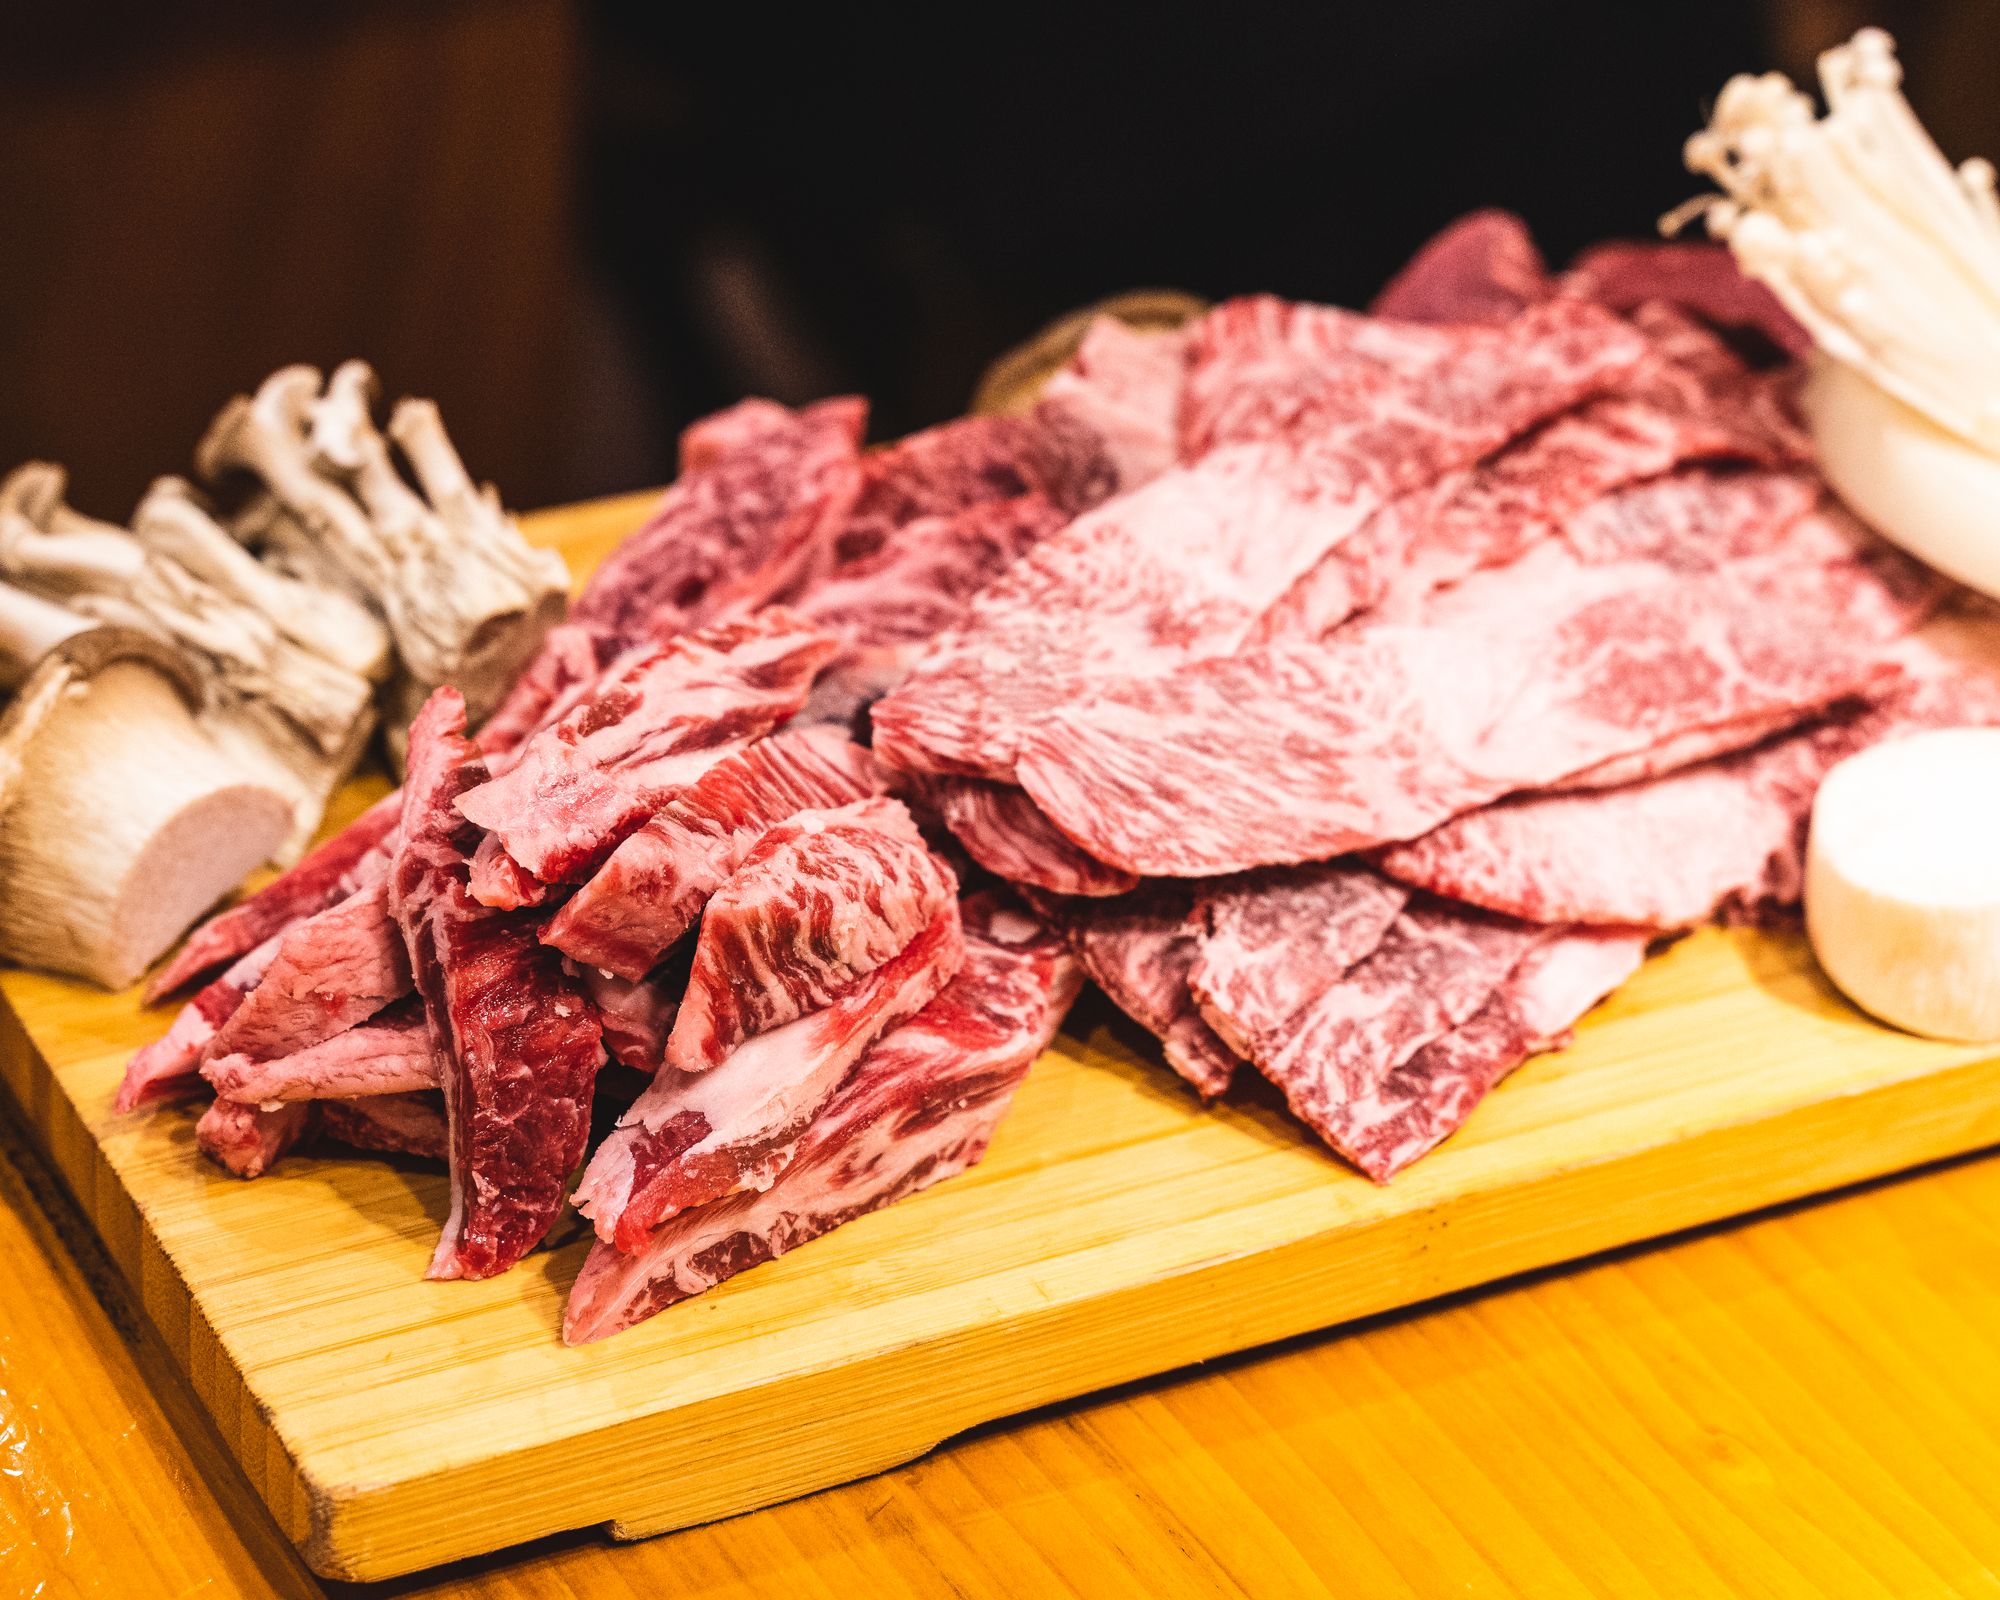 A platter of marbled raw wagyu